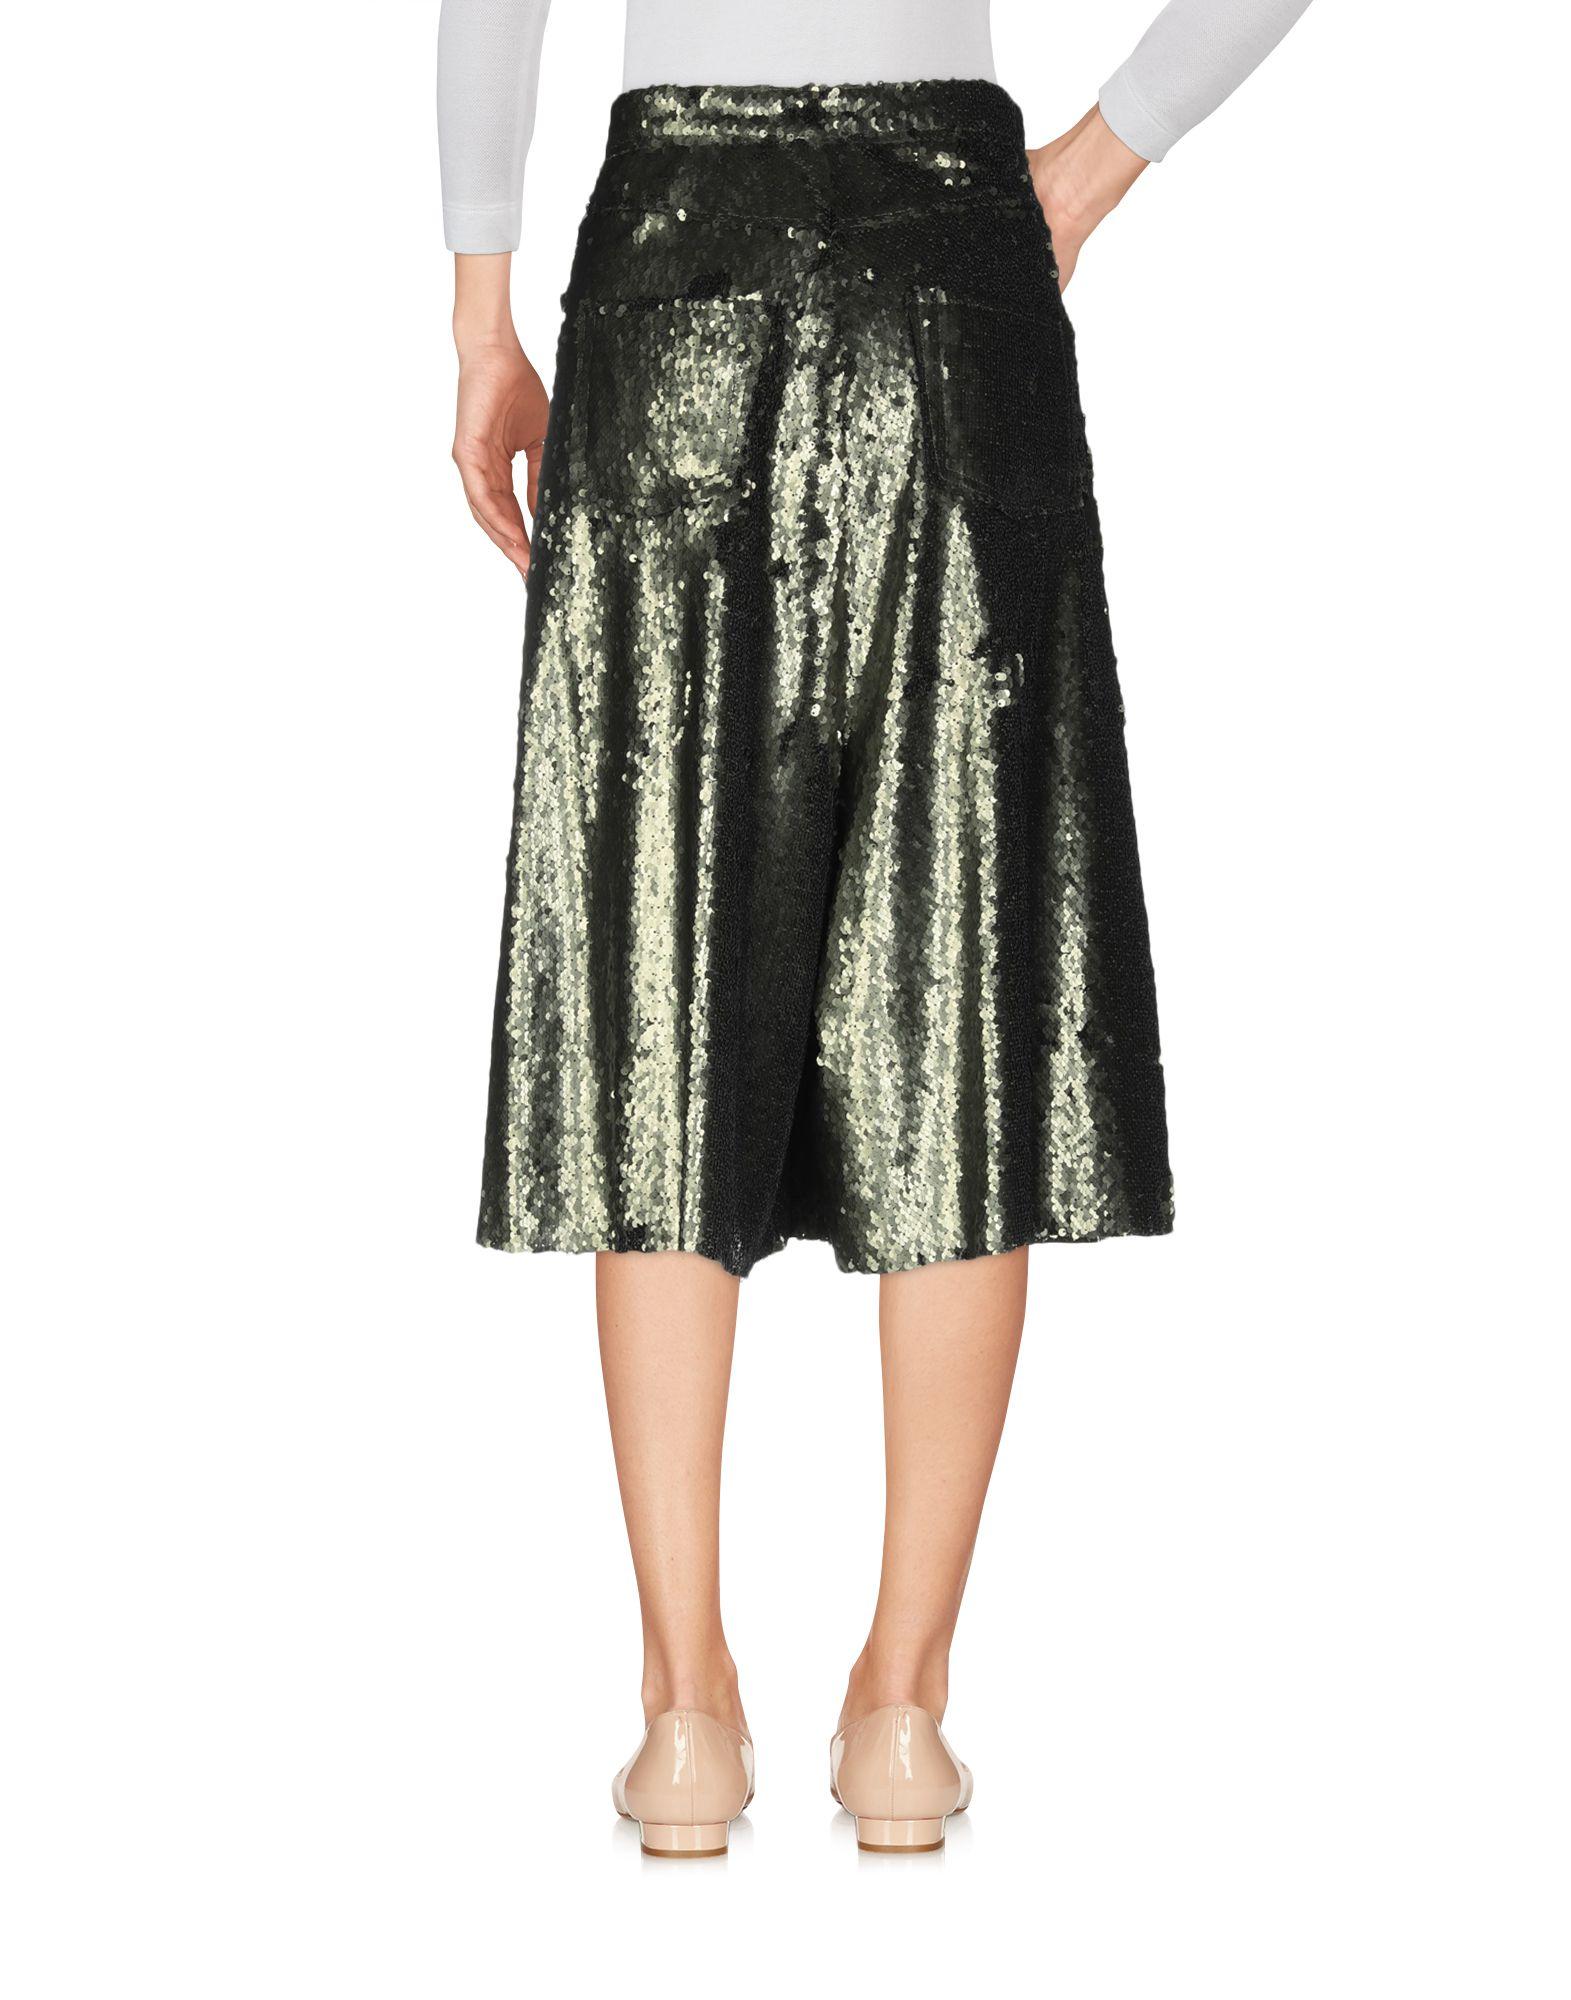 Marques'Almeida Tulle Knee Length Skirt in Military Green (Green) - Lyst